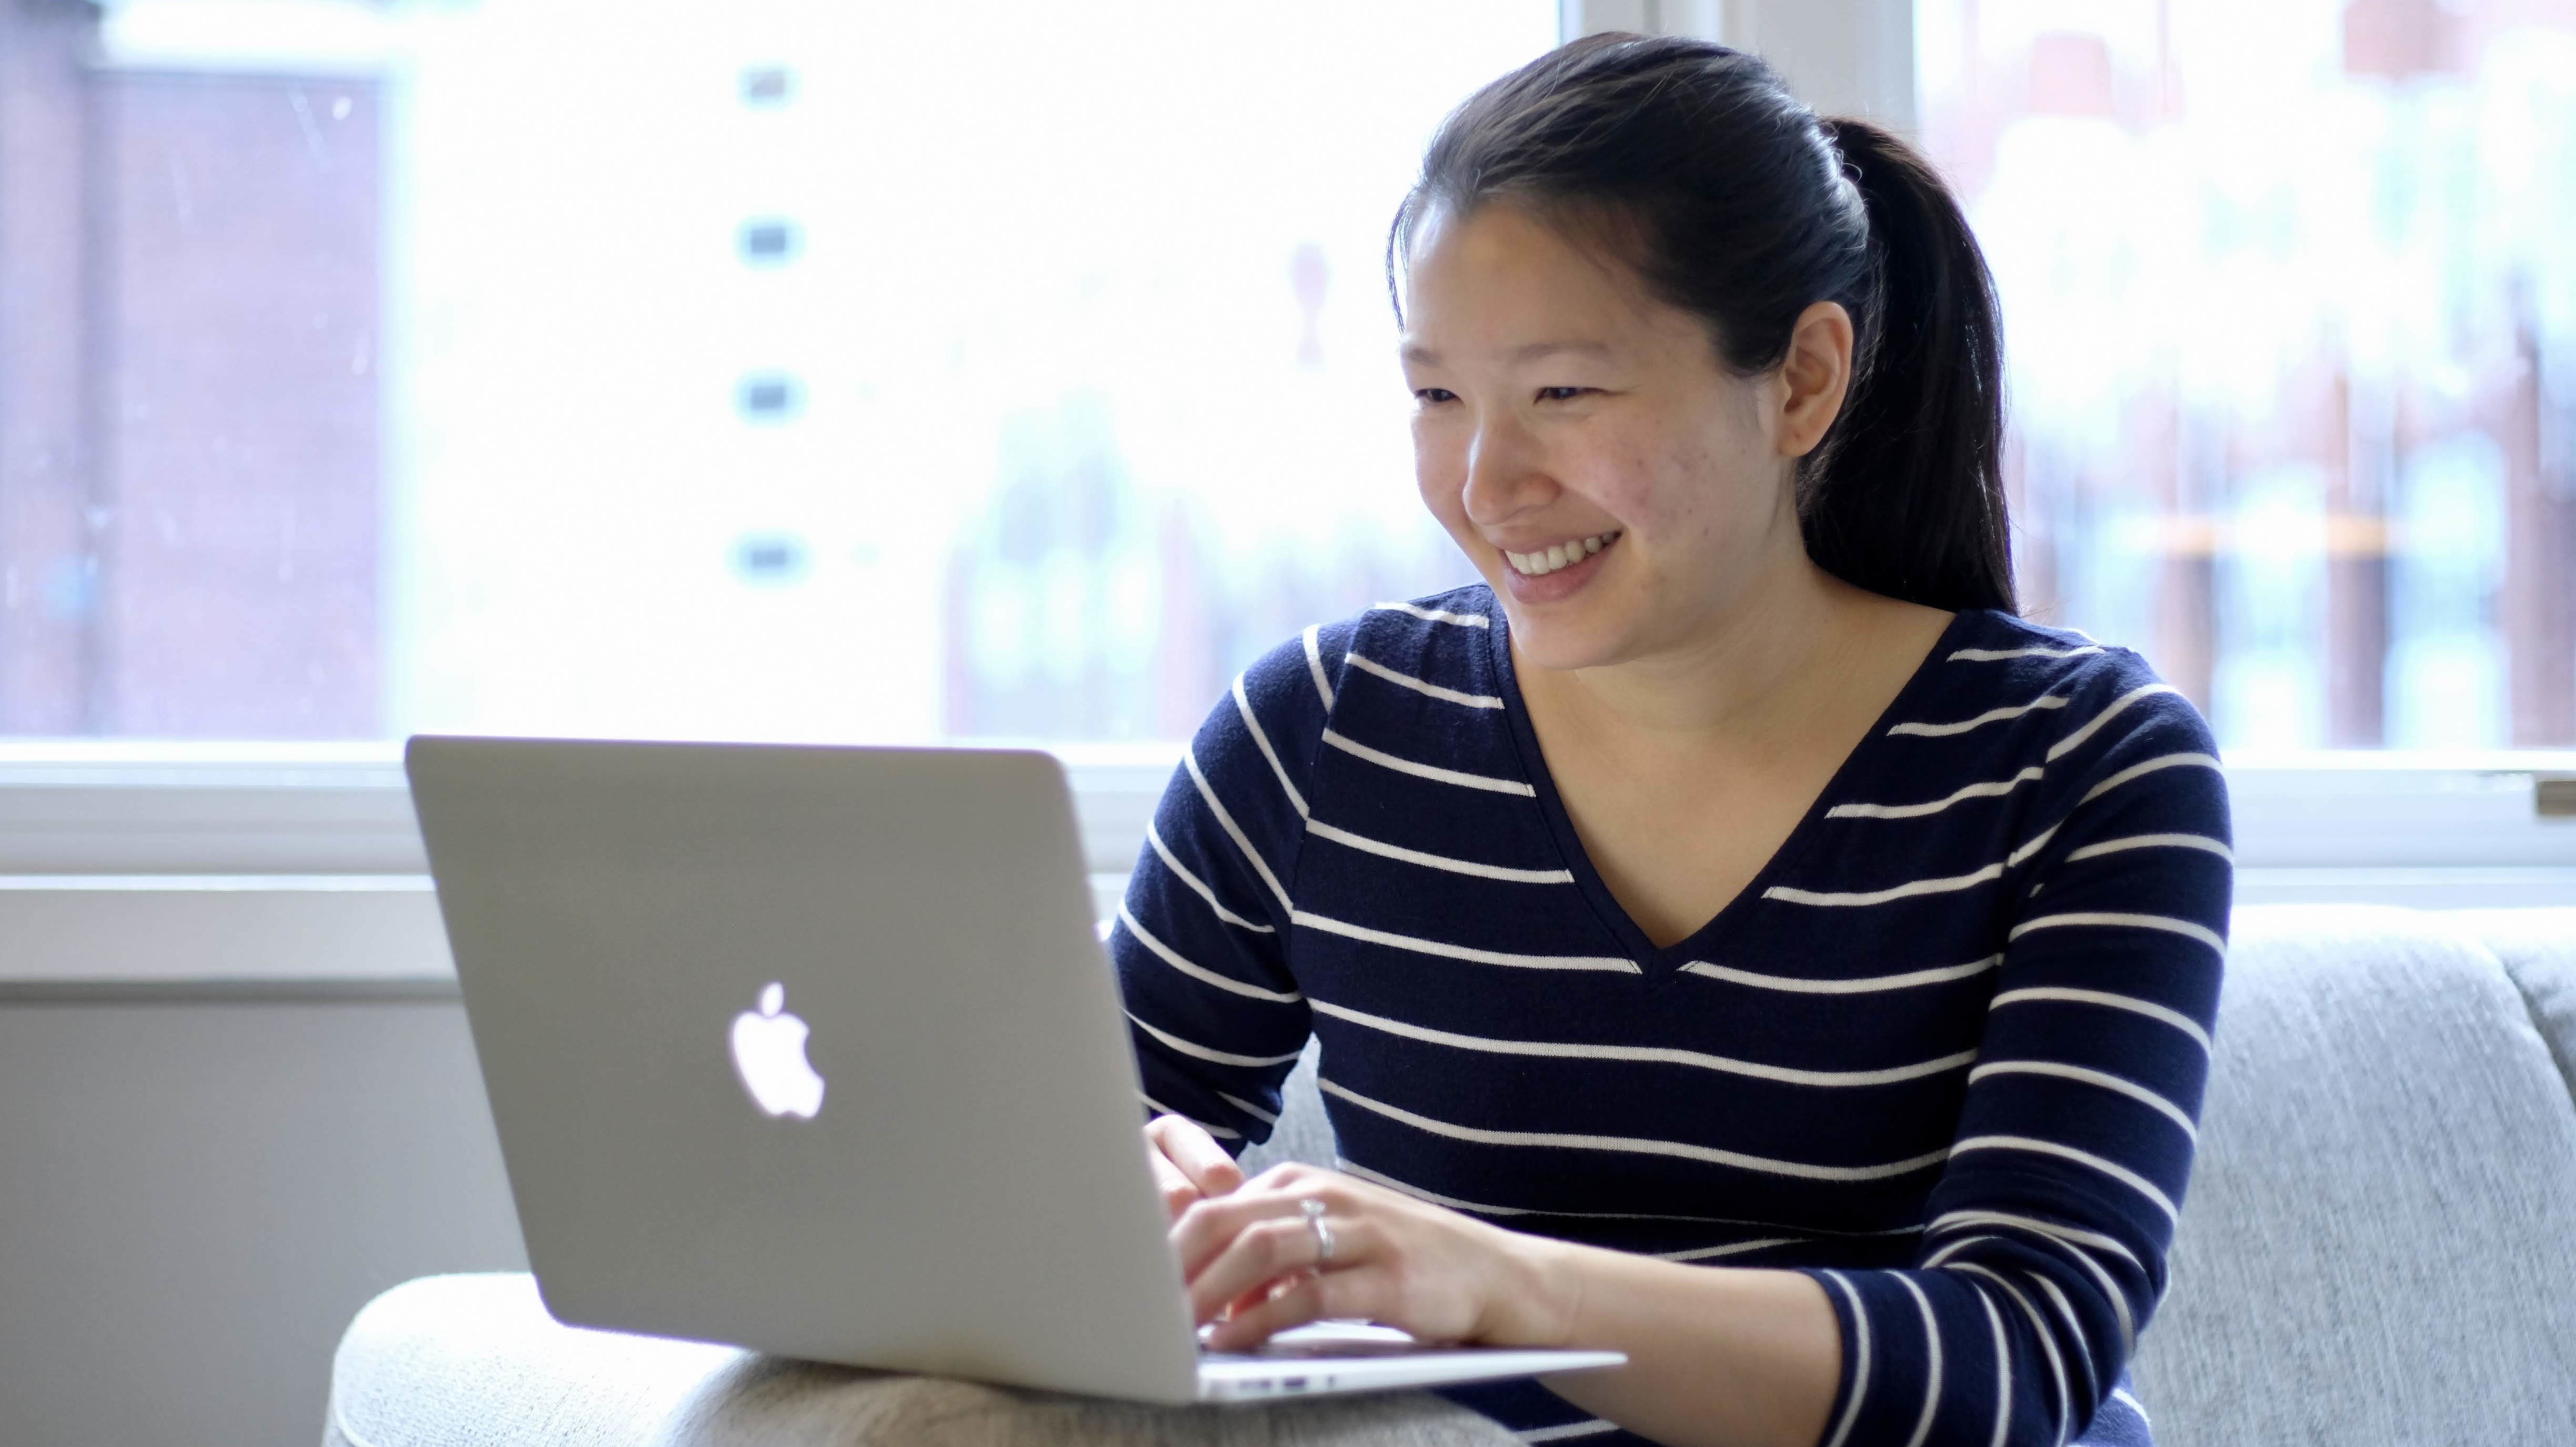 Woman smiling at an Apple laptop.